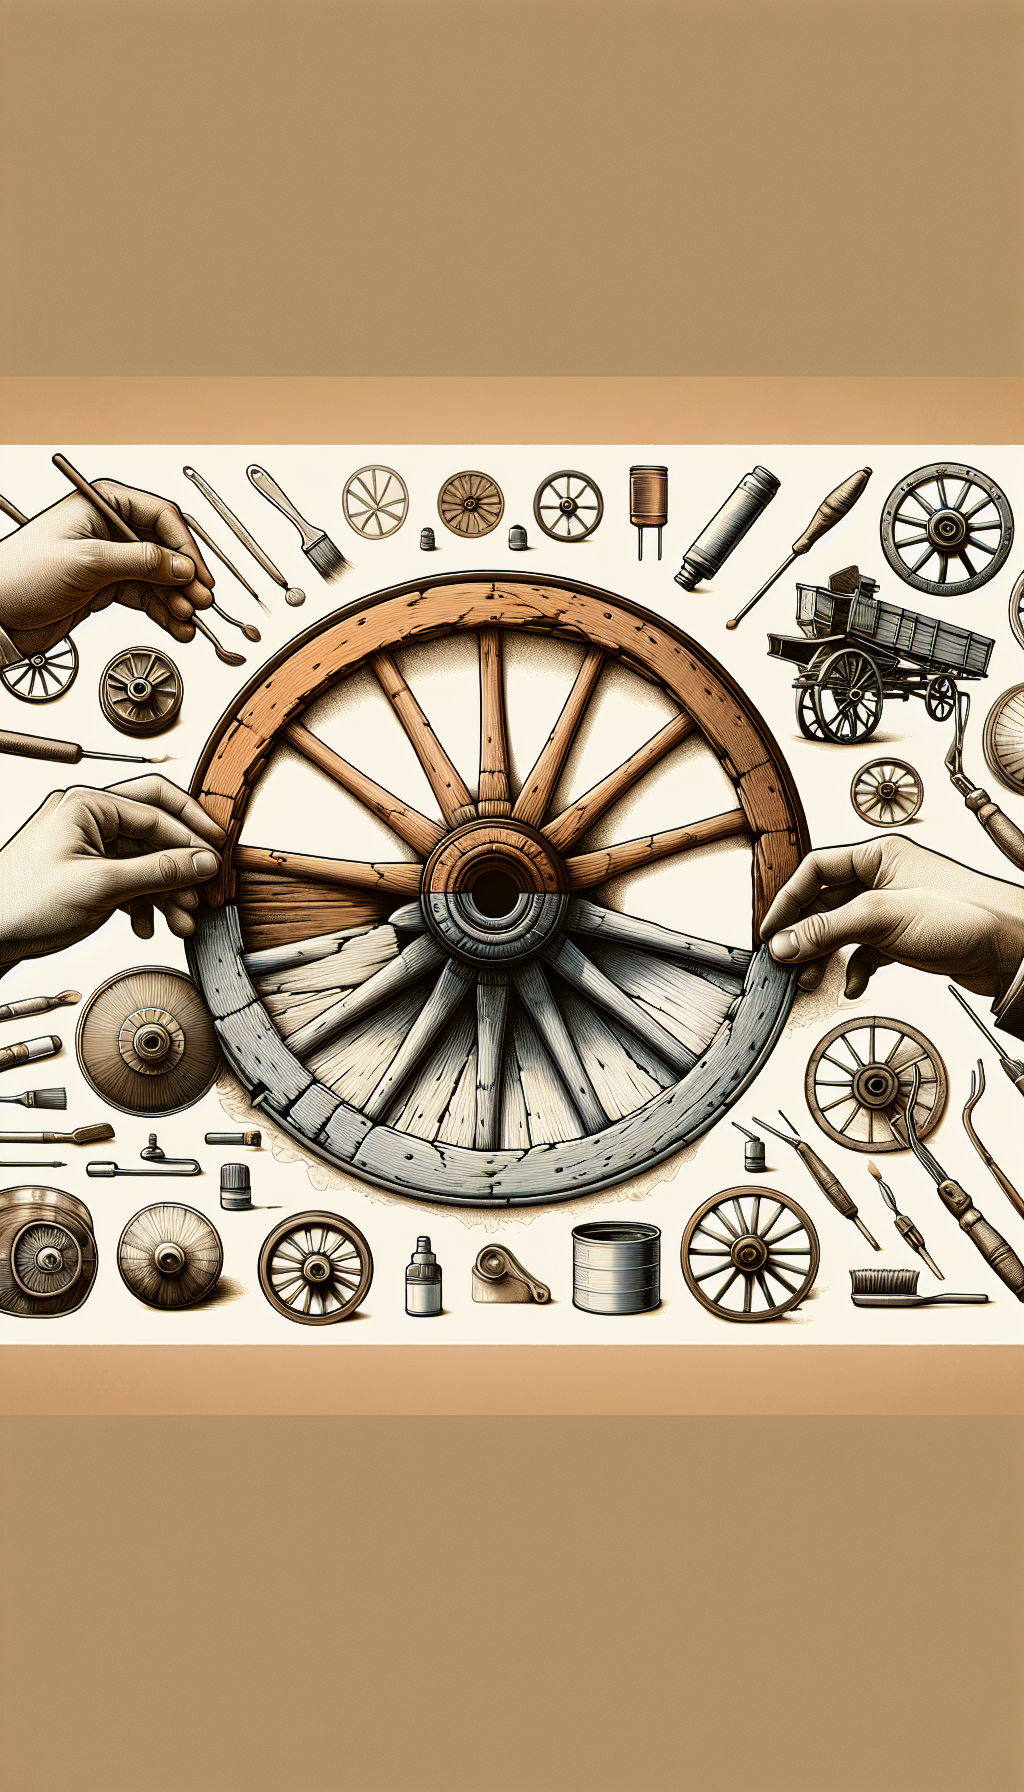 An illustration depicts a pair of hands gently cradling an antique wagon wheel, with one side brightly restored and the other weathered. Around the wheel, semi-transparent outlines of various vintage wheels float as if in identification comparison, while delicate tools and a protective varnish can lie nearby. The styles alternate between photo-realism for the hands and wheel, and line art for the floating outlines.